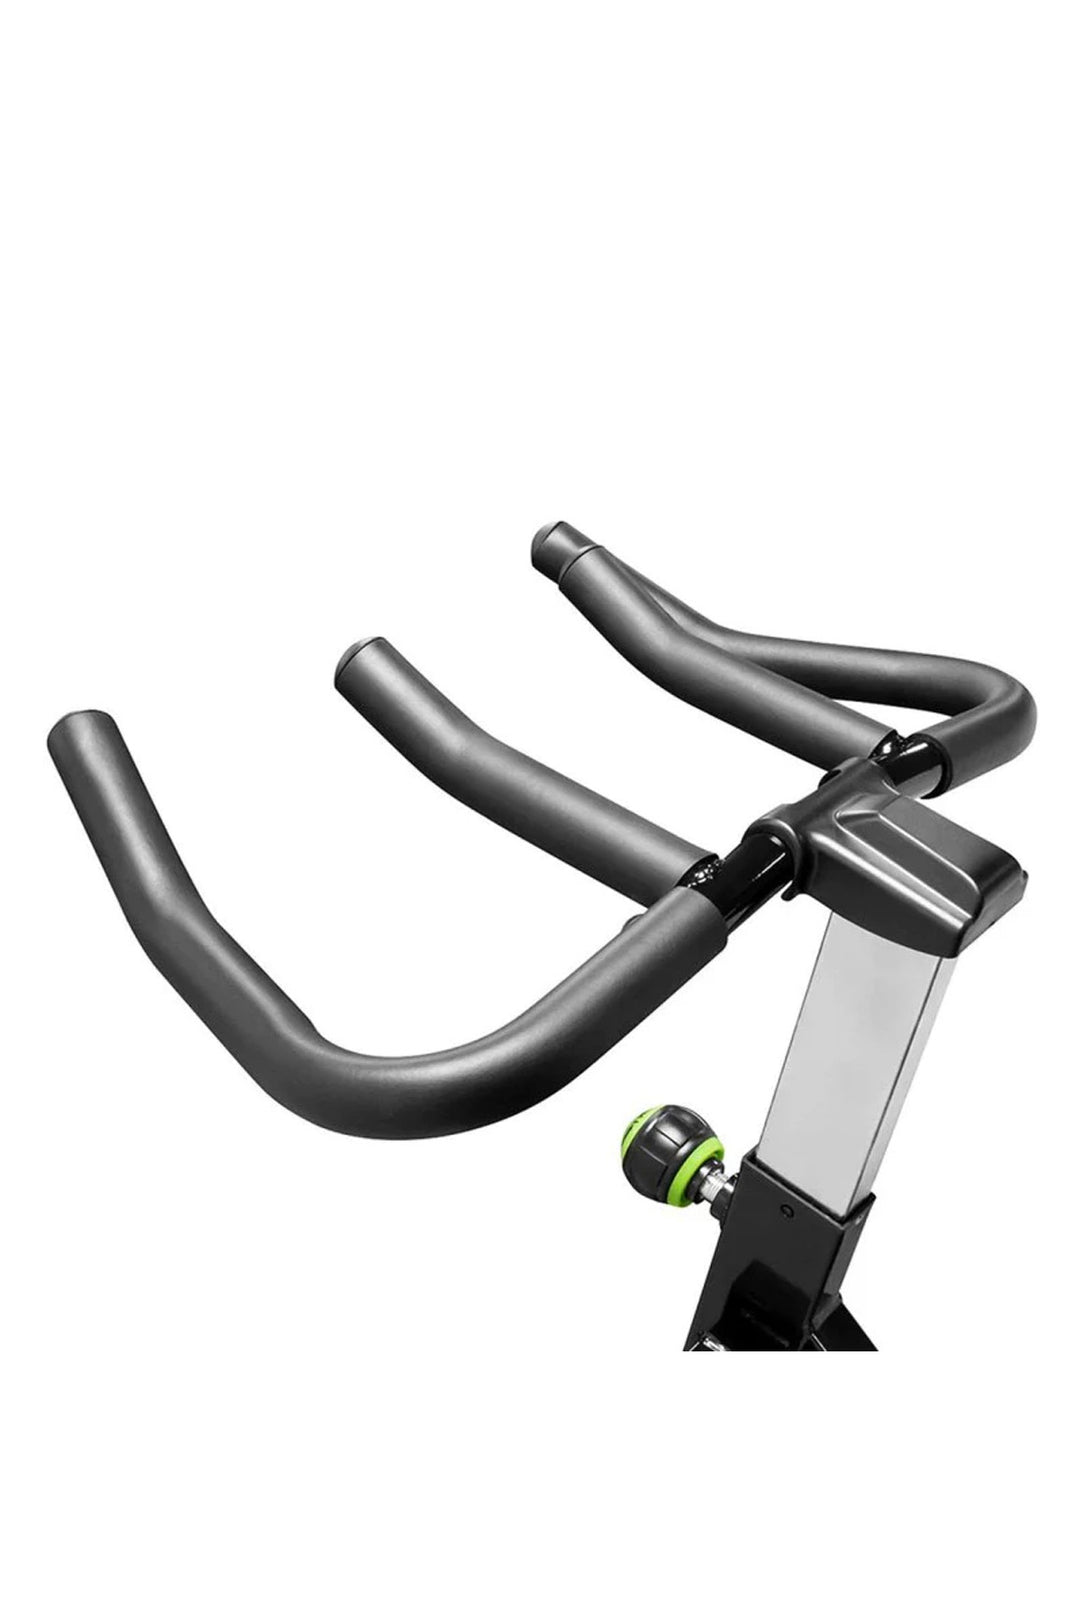 Marcy Club Trainer Spin Bike